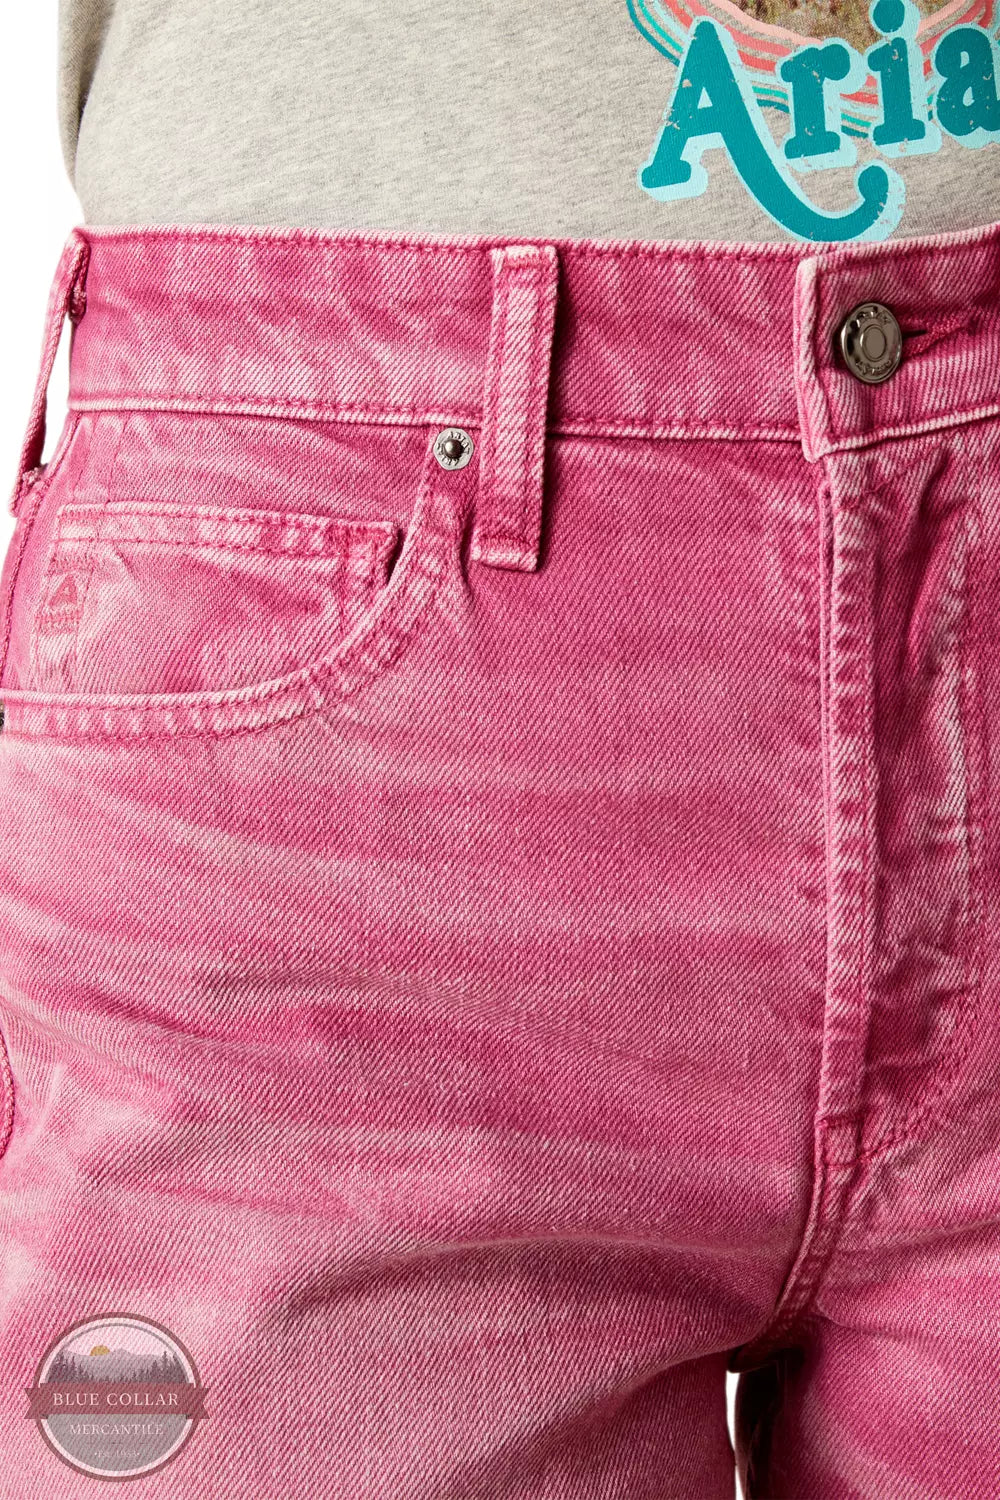 Ariat 10048257 Ultra High Rise Tomboy Wide Jeans in Pink Front Detail View